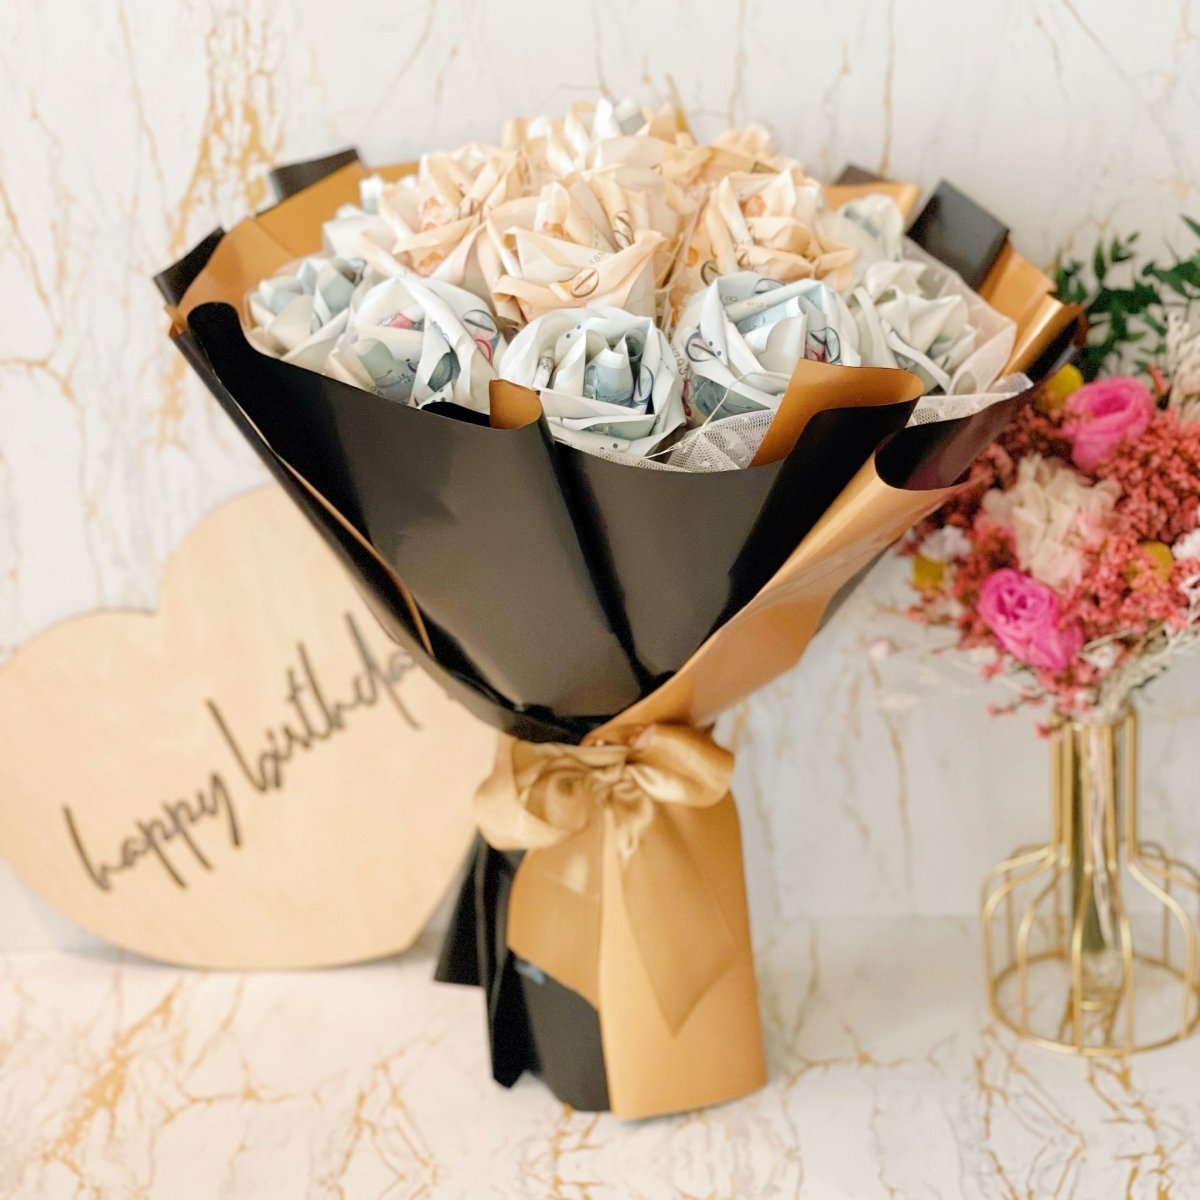 Rose and Money Bouquet